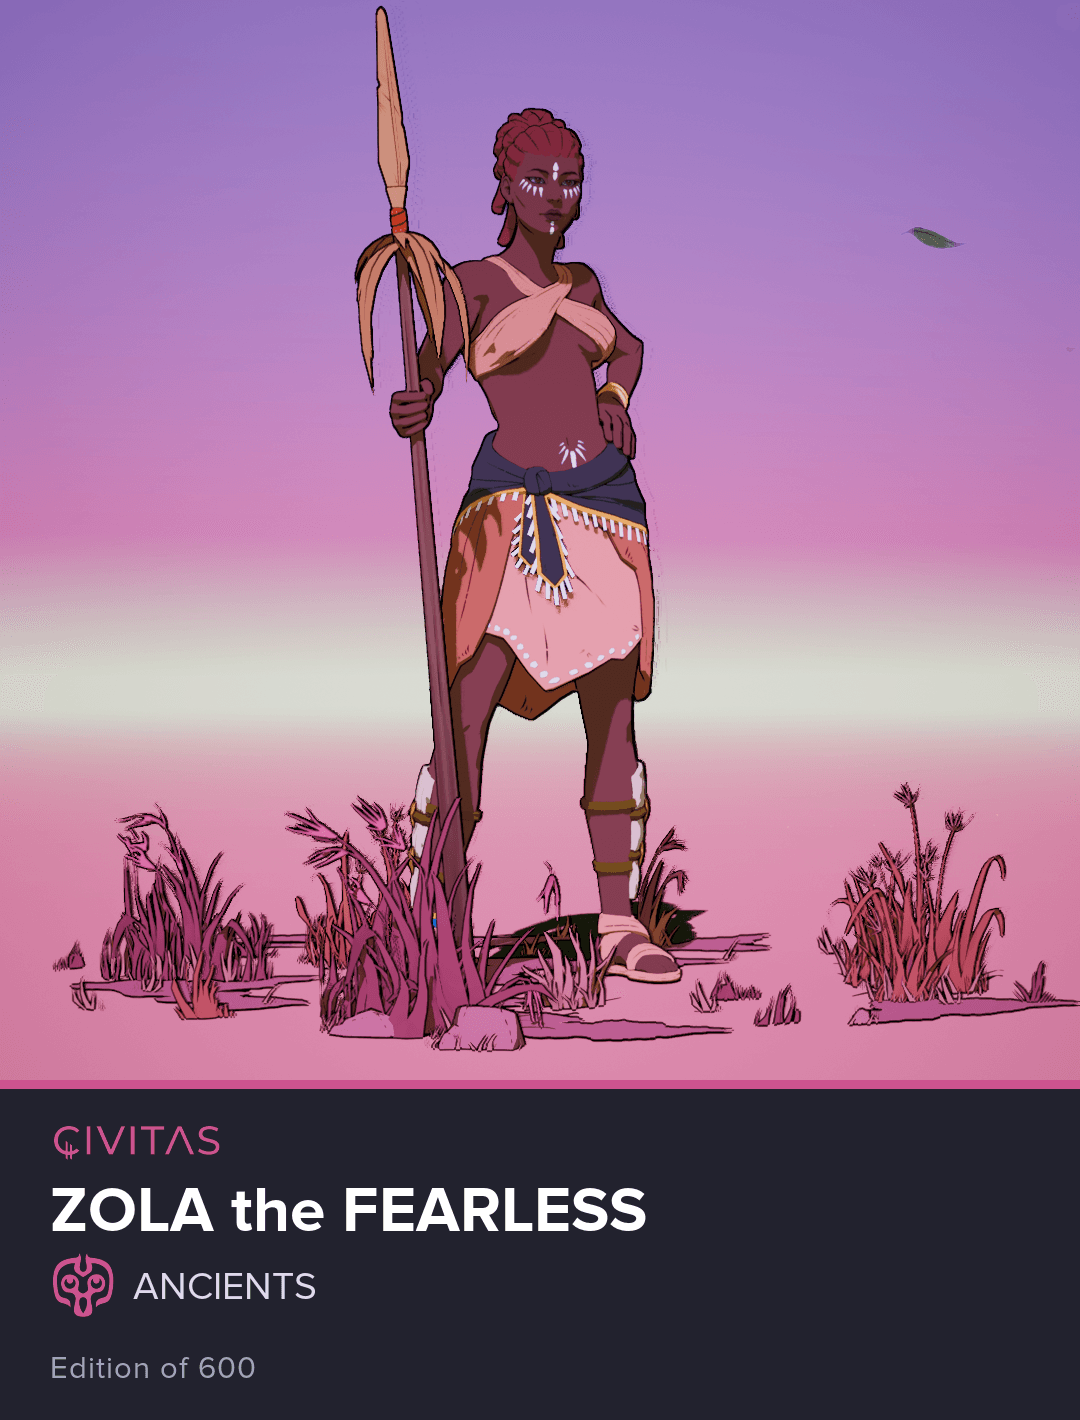 Zola the Fearless #513